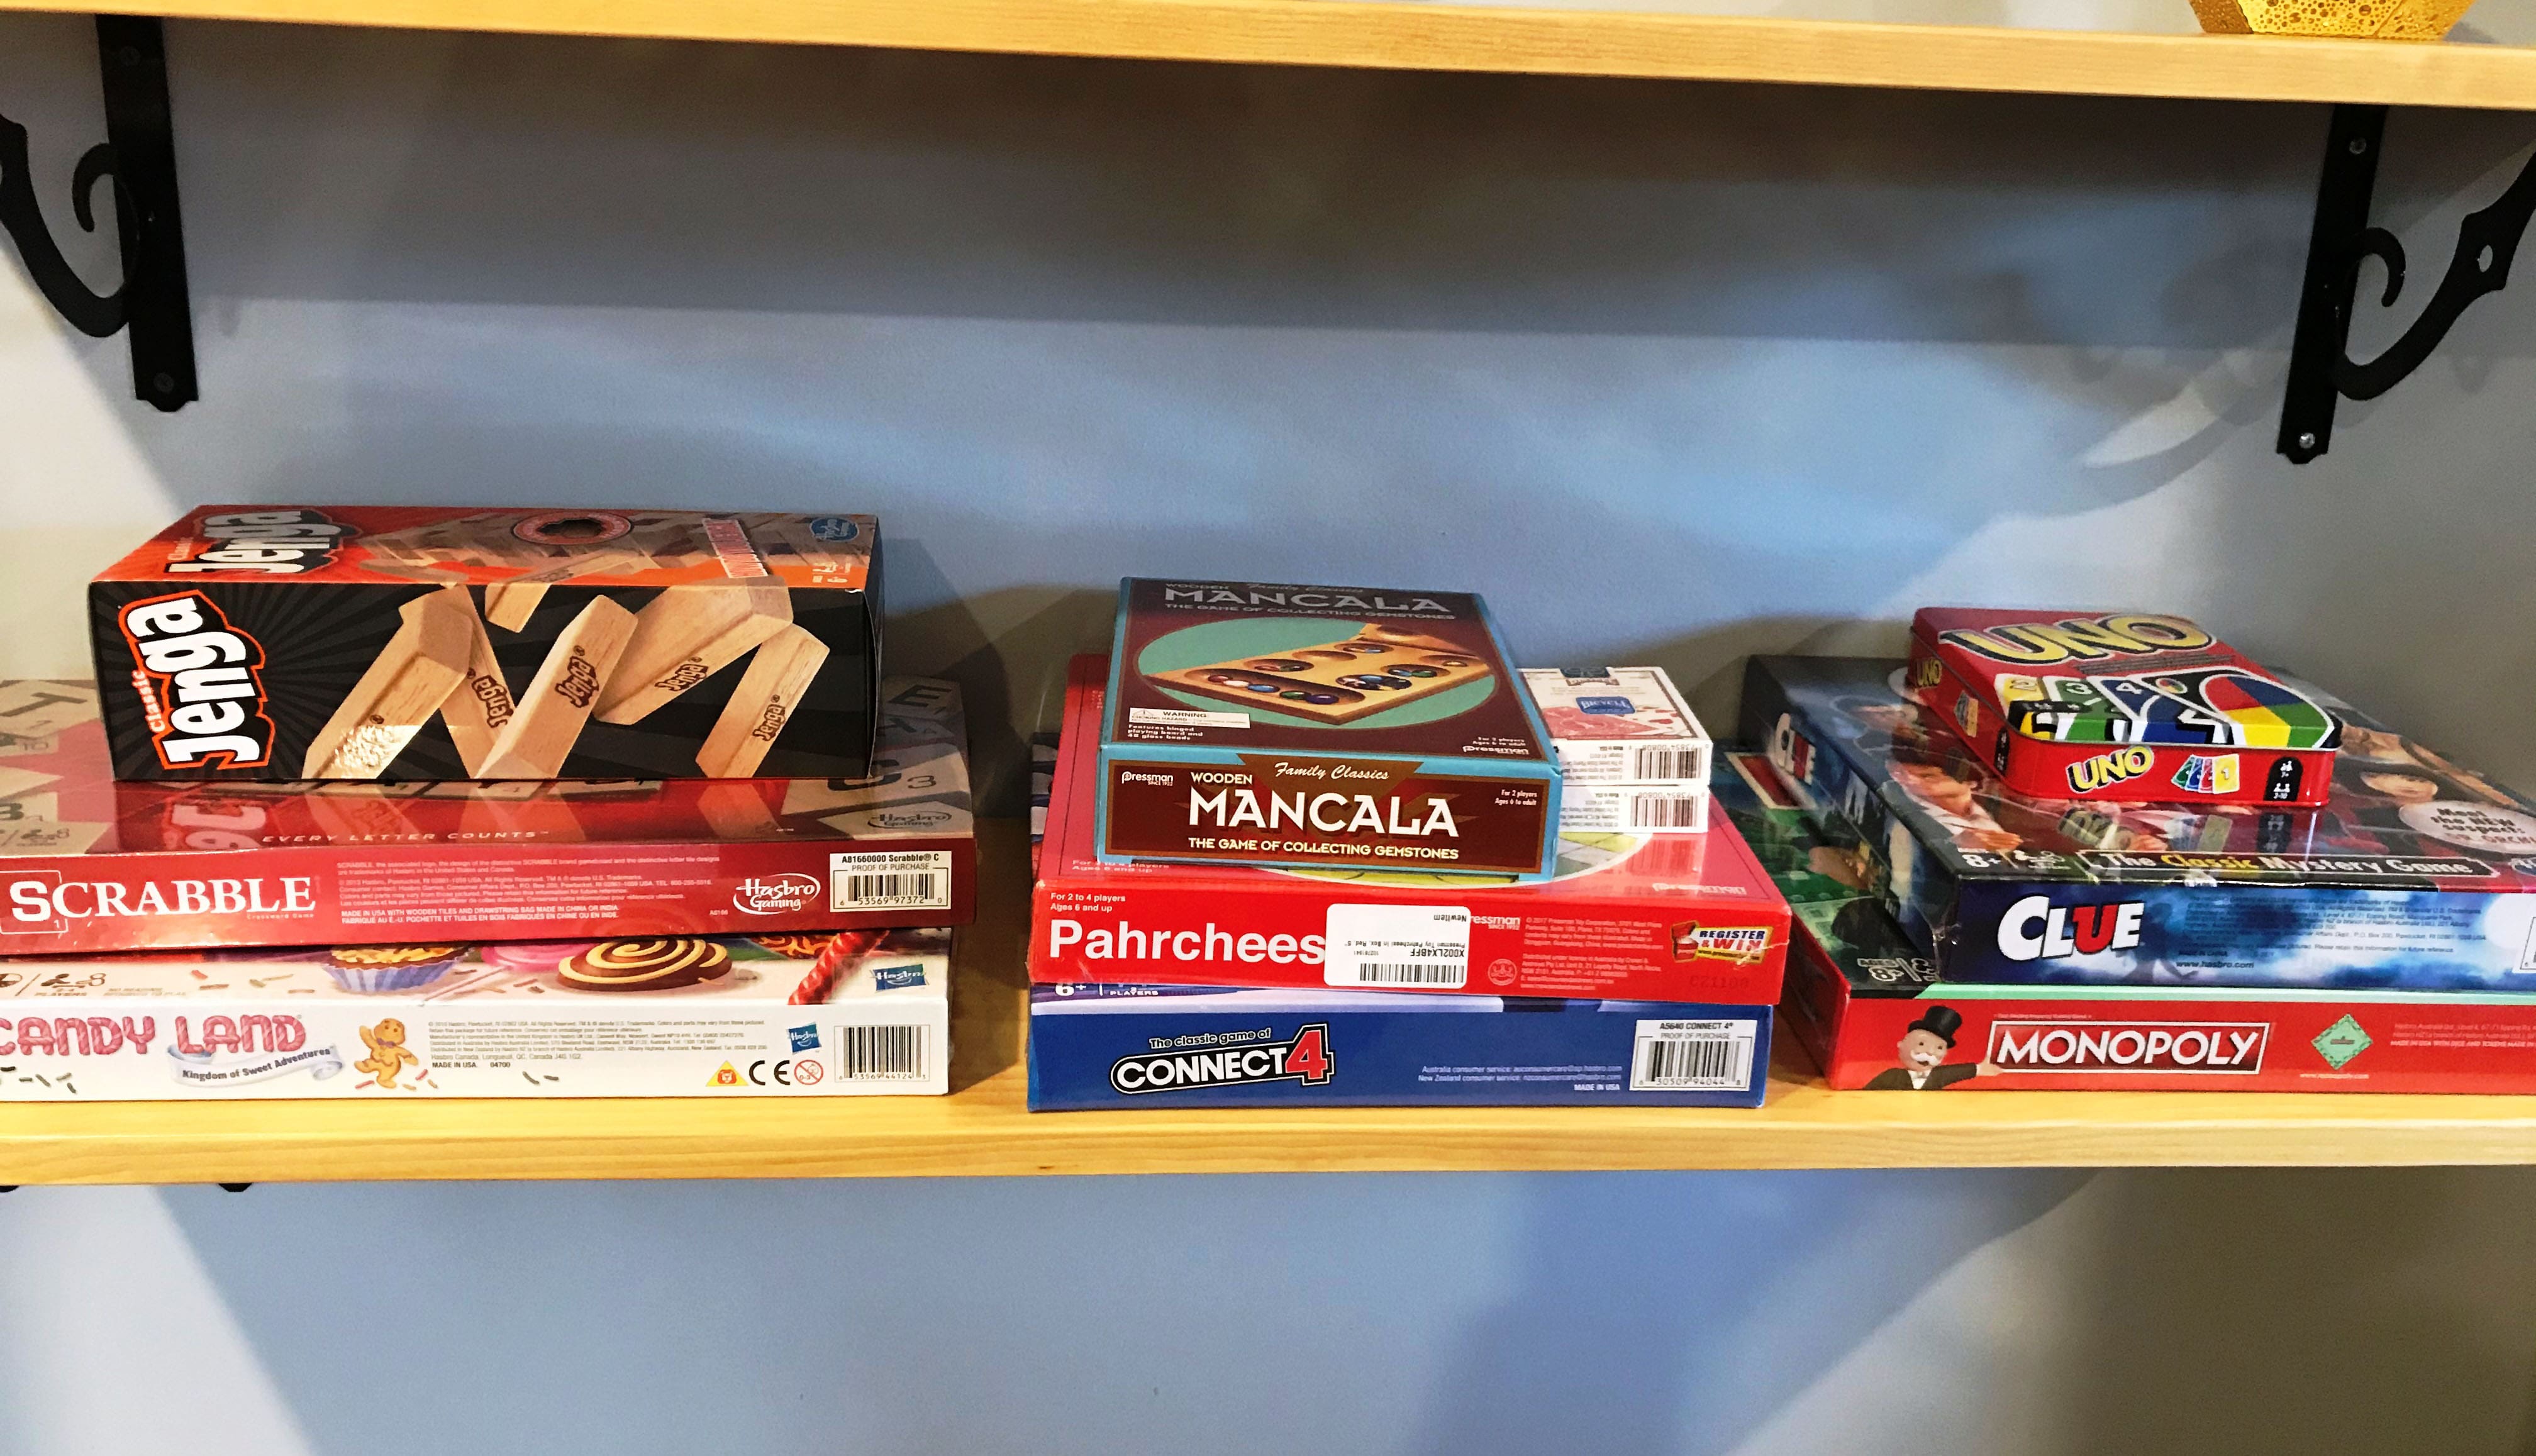 Plenty of board games to keep the country vibe going!